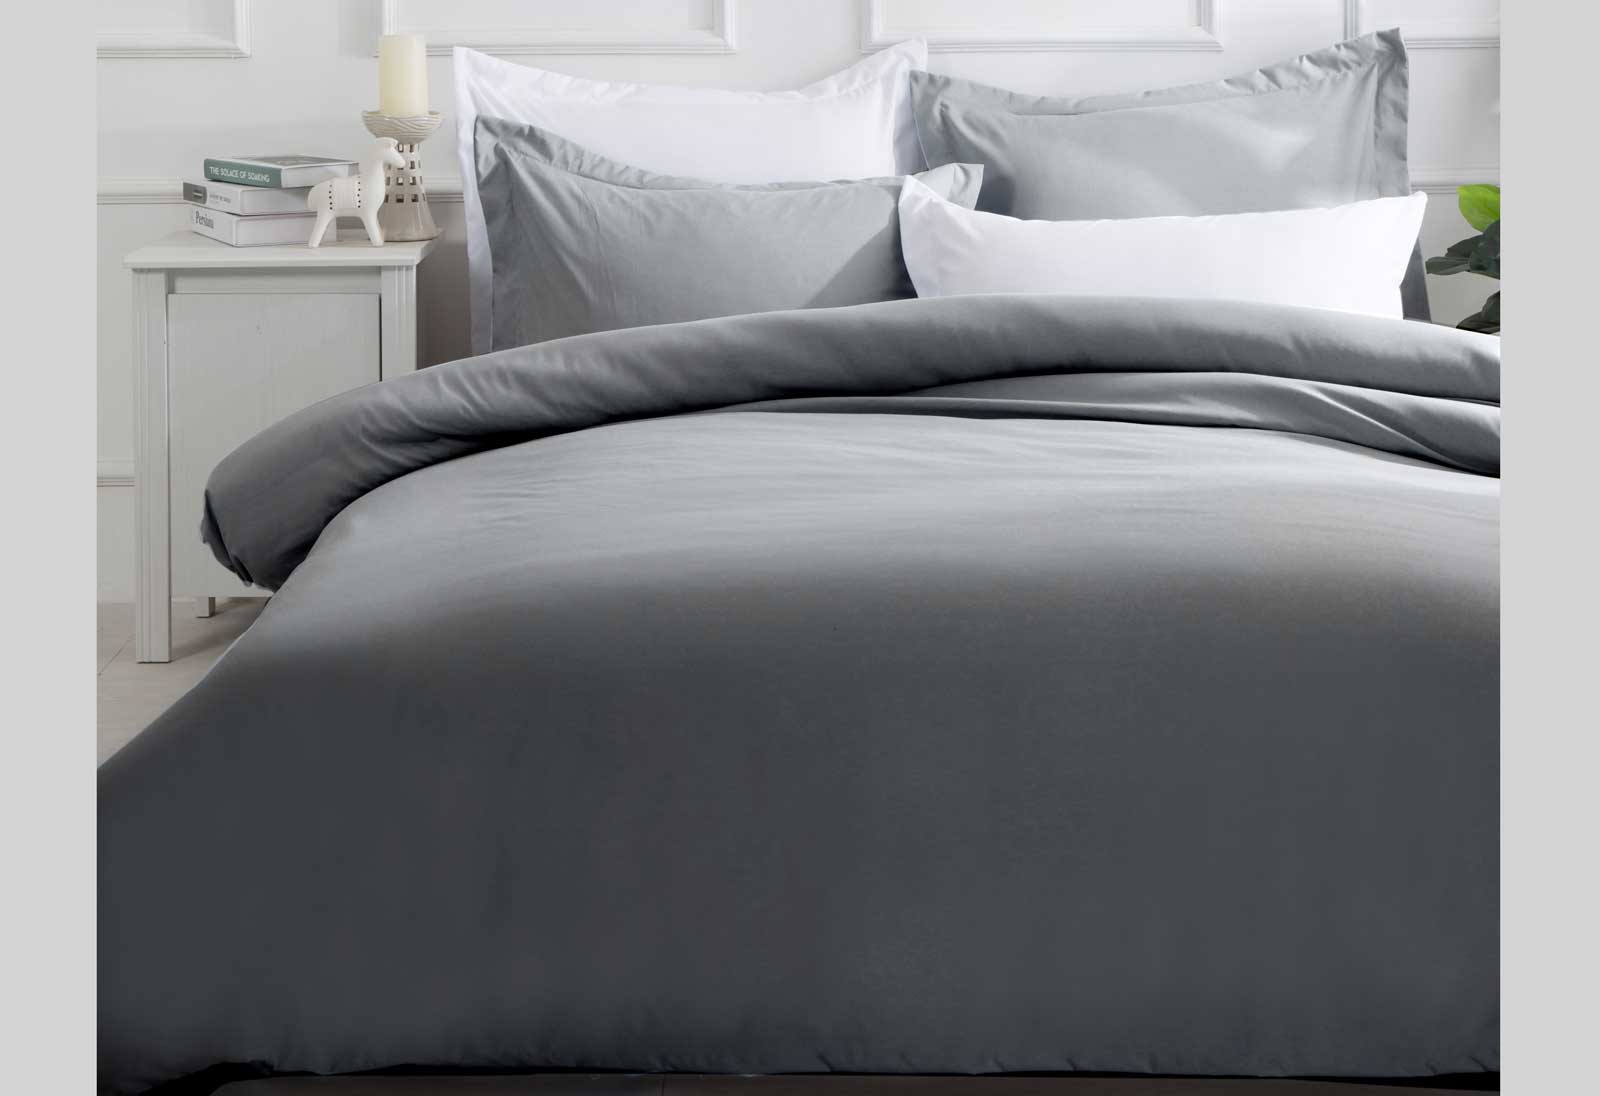 Plain Slate Color Quilt Cover Grey Doona Cover set (Single / Queen / King / Super King Options)